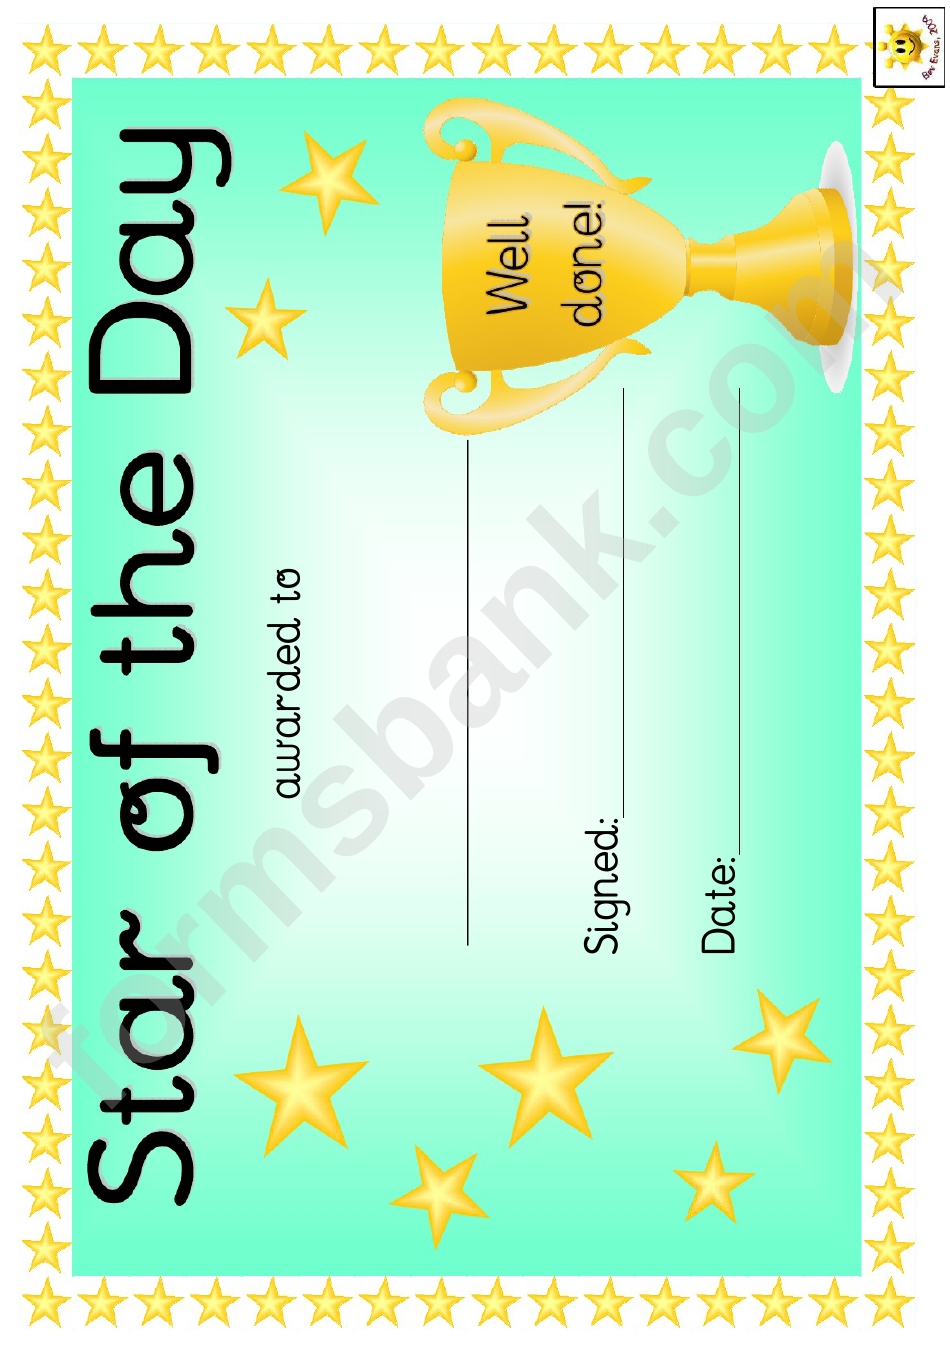 Star Of The Day Award Certificate Template - Green